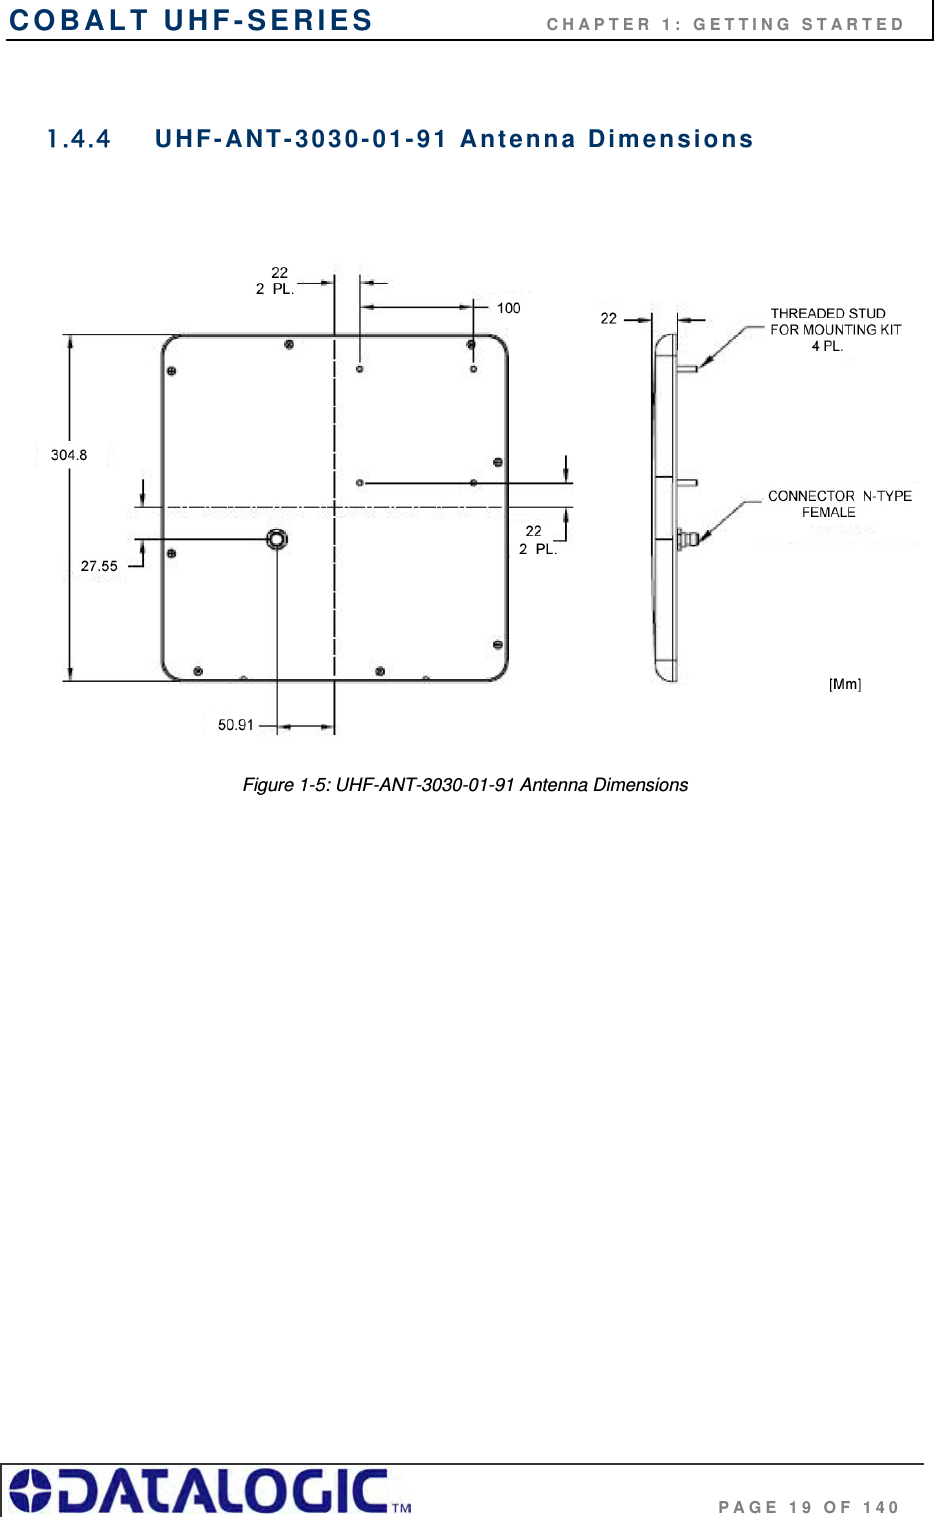 COBALT UHF-SERIES                    CHAPTER 1: GETTING STARTED                                     PAGE 19 OF 140  1.4.4  UHF-ANT-3030-01-91 Antenna Dimensions    Figure 1-5: UHF-ANT-3030-01-91 Antenna Dimensions  